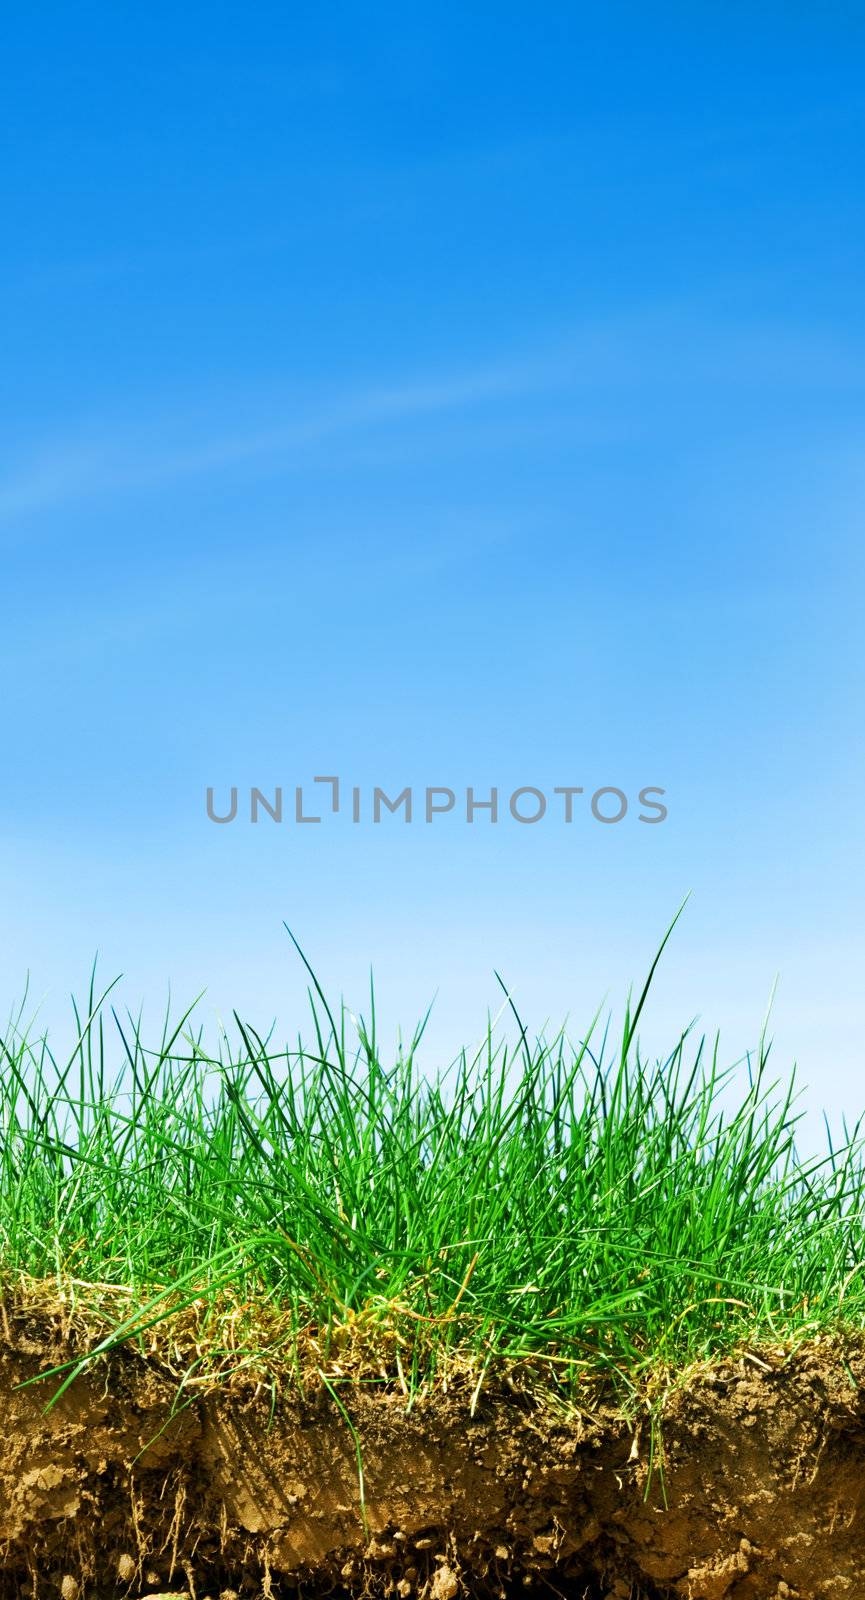 Ground, grass, sky. Cross section of three elements of nature. Vertical